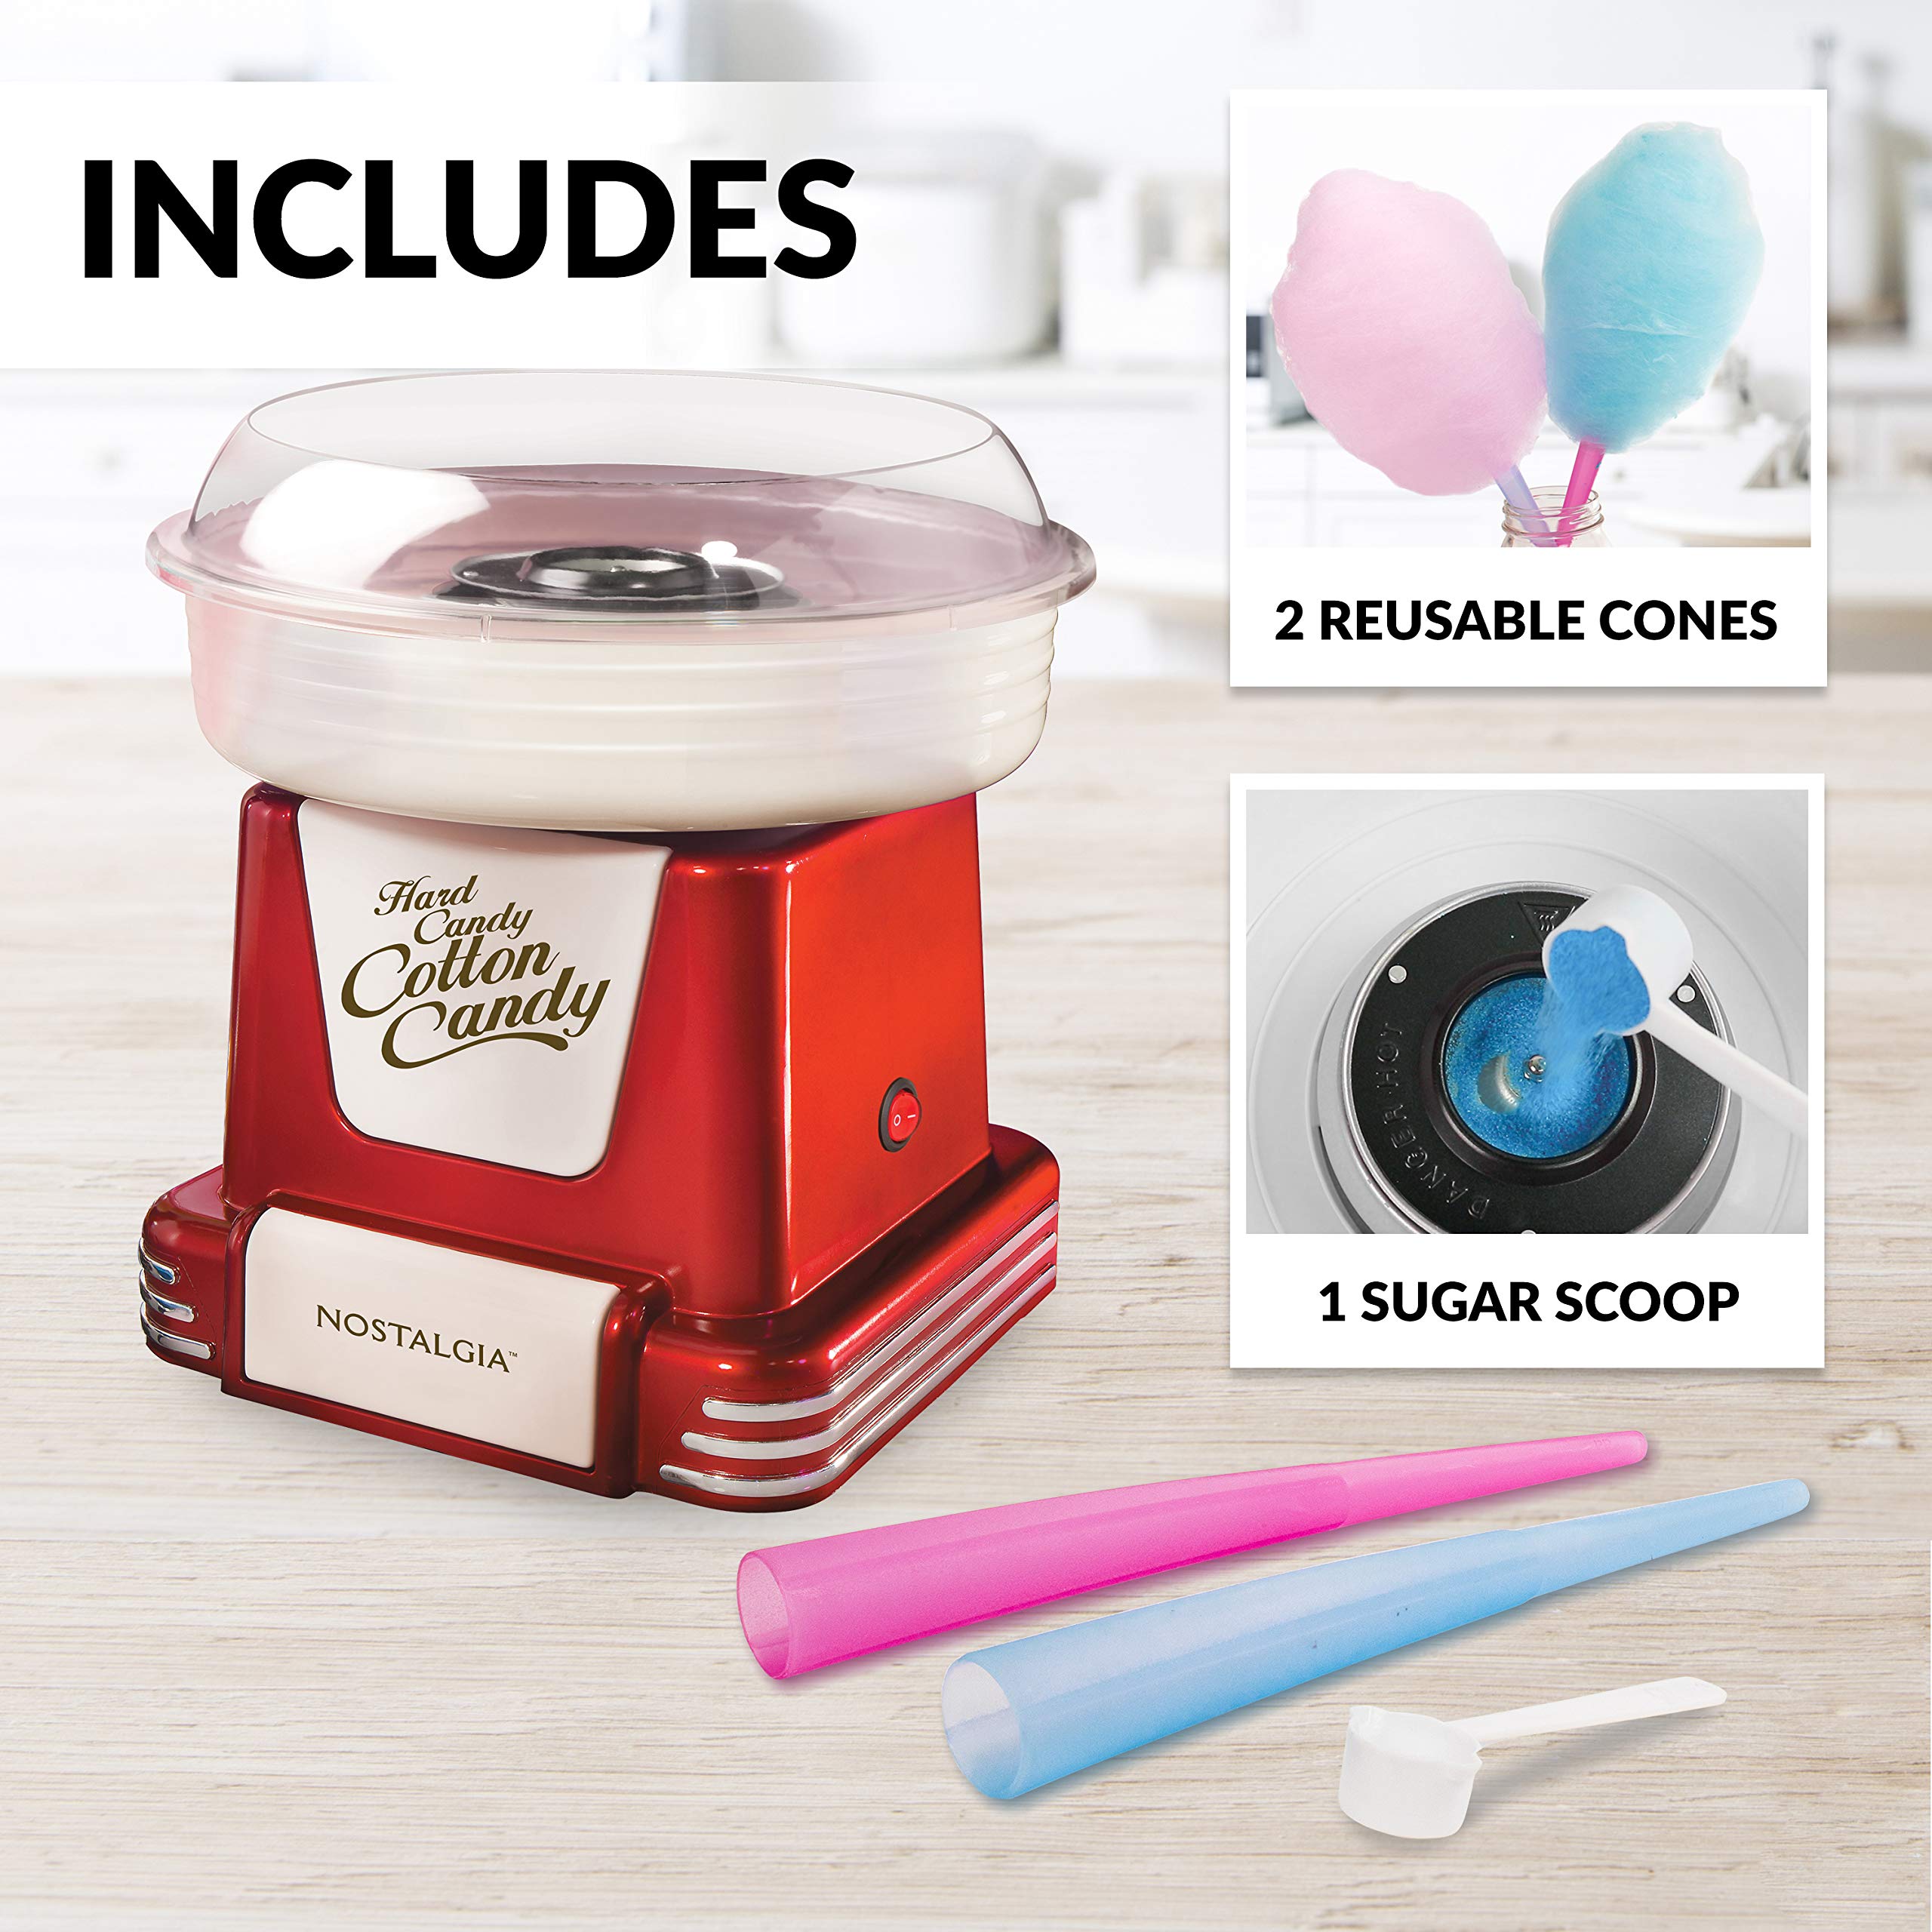 Nostalgia Retro Countertop Cotton Candy Maker, Vintage Candy Machine for Hard Candy & Flossing Sugar, Includes 2 reusable cones, 1 sugar scoop, and 1 Extractor head, Retro Red